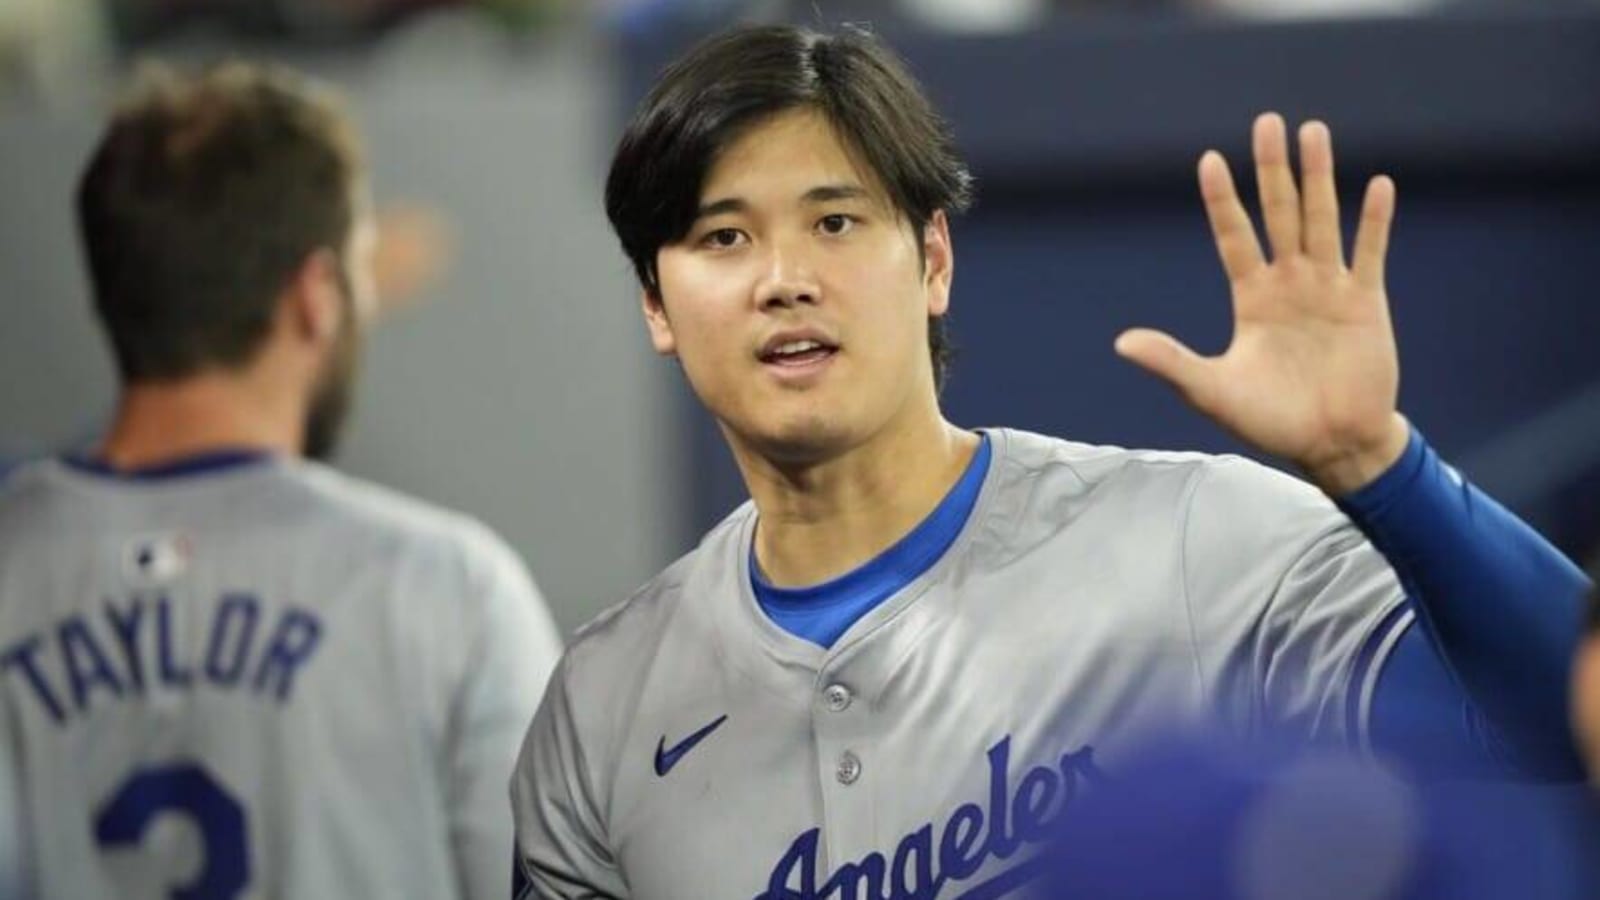 Dodgers Trolled Shohei Ohtani With Boos After Home Run Against Blue Jays